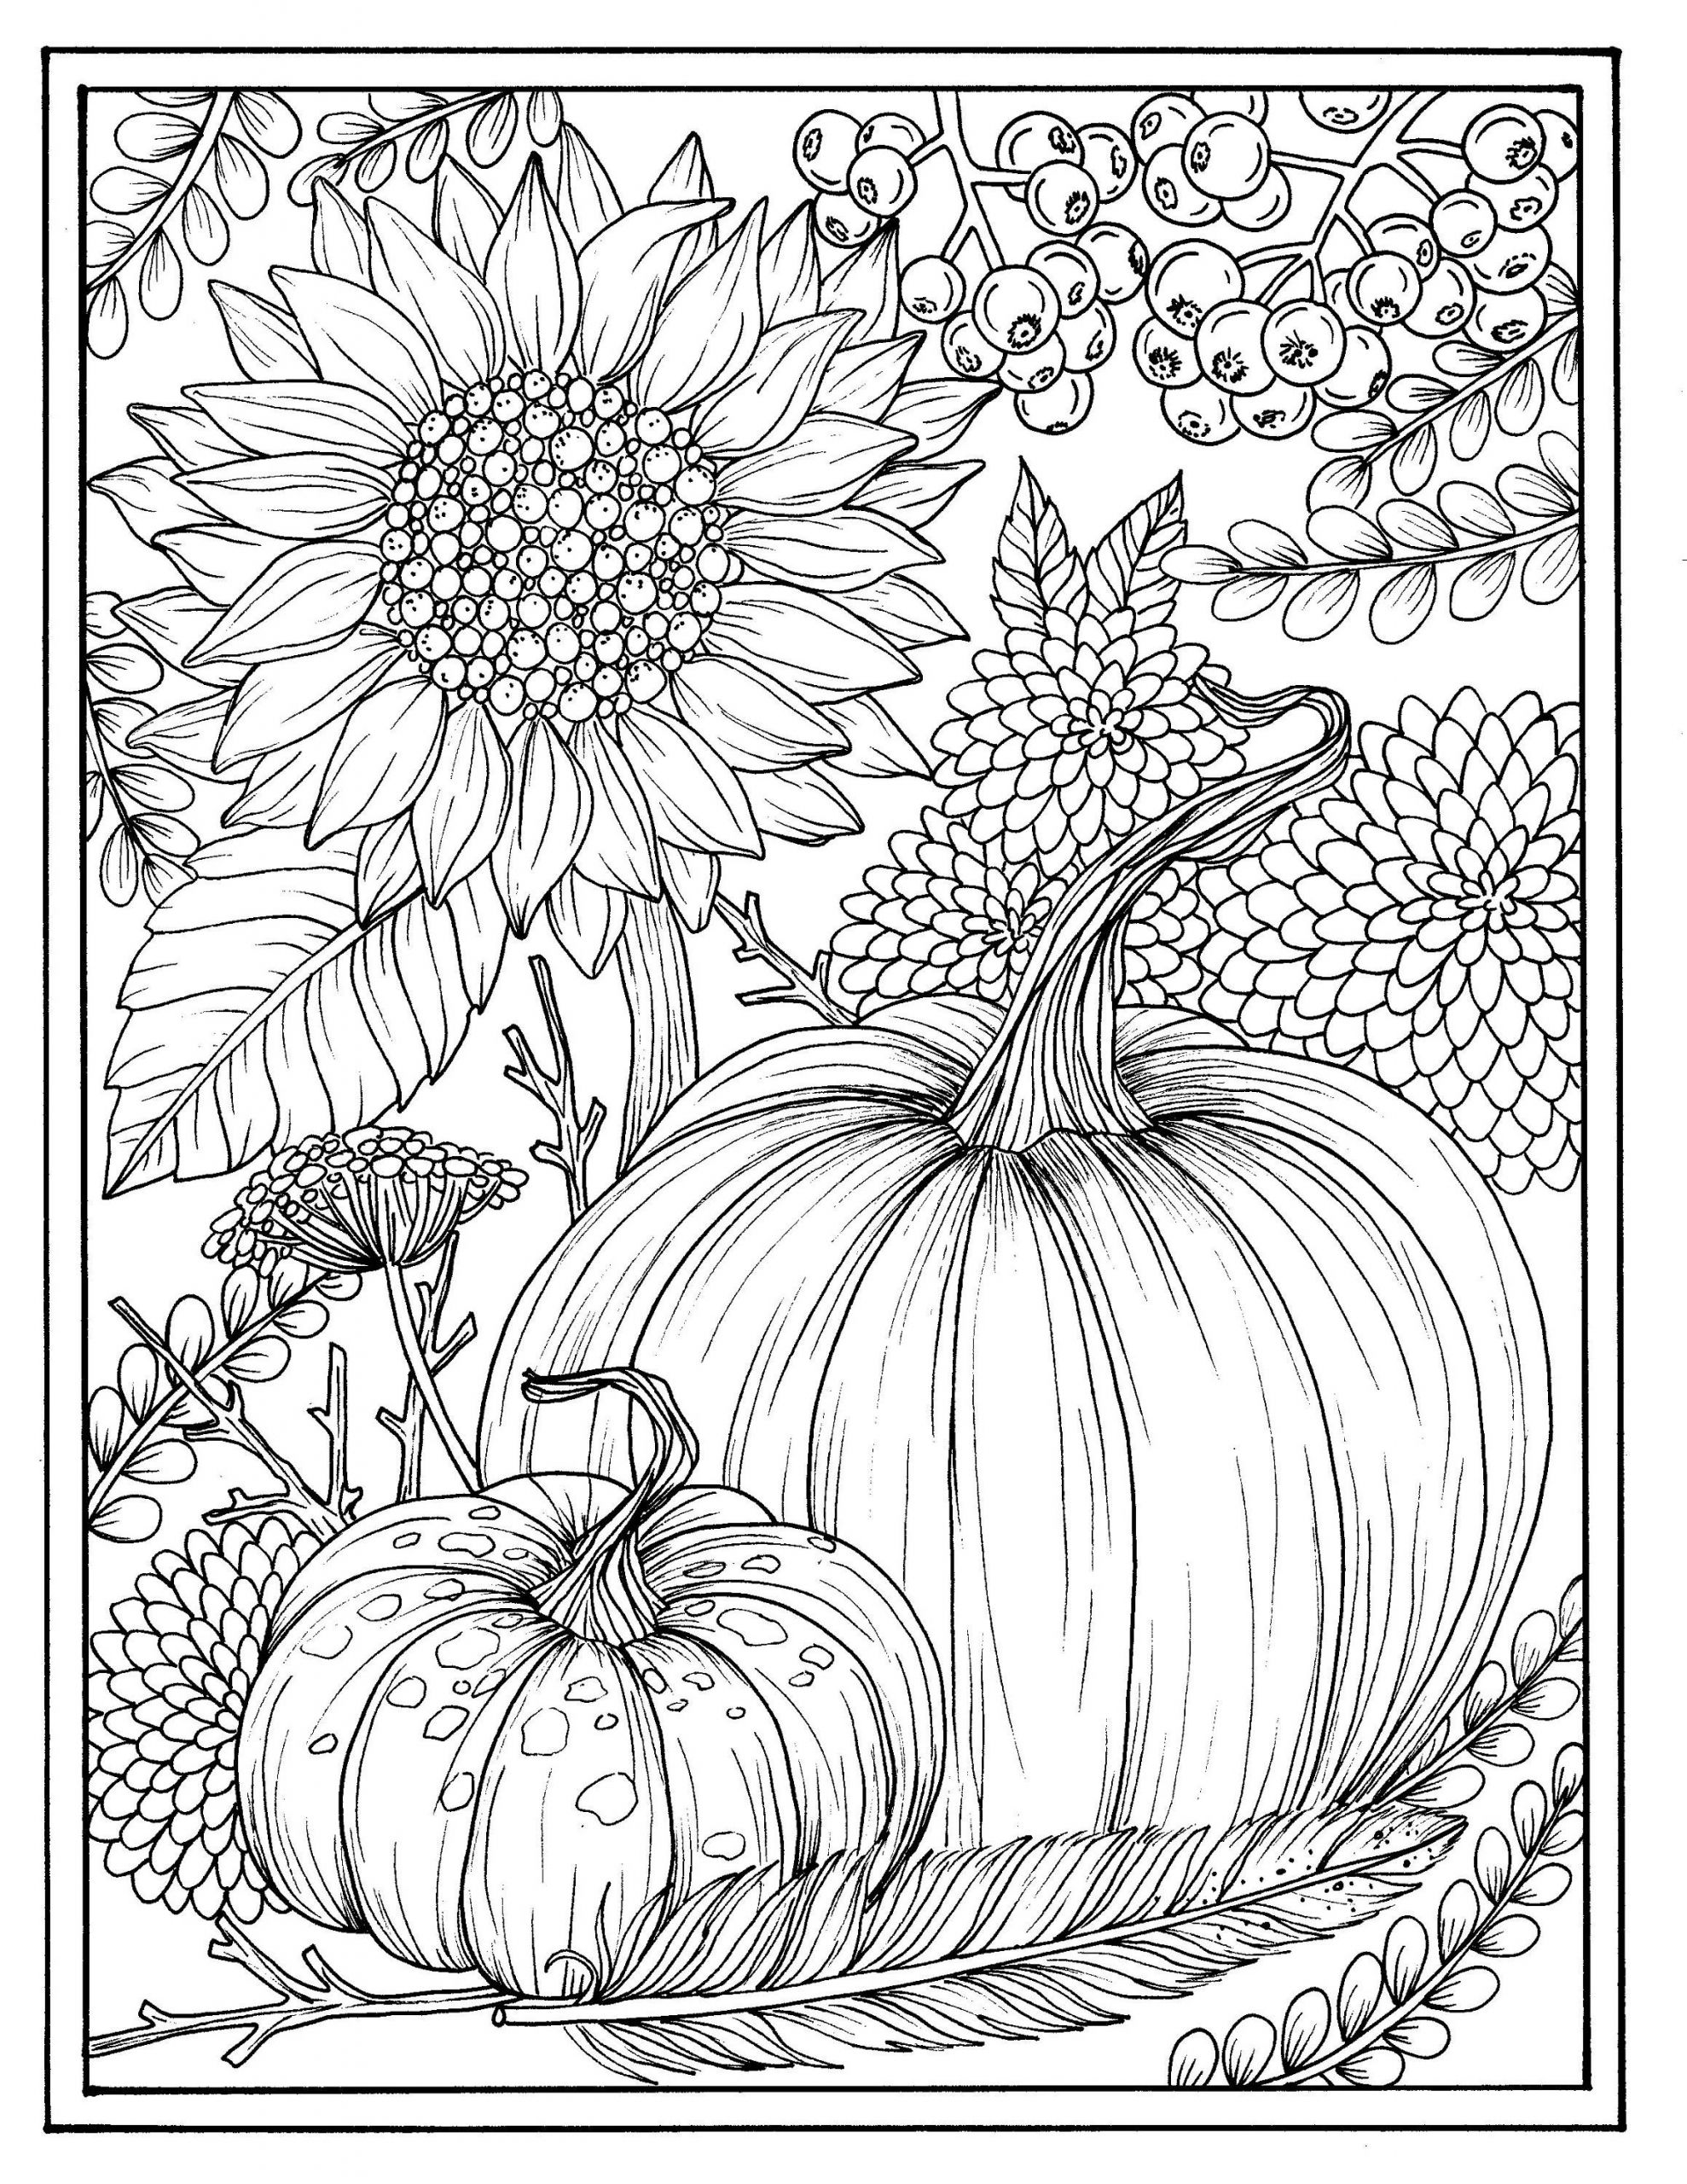 Fall Coloring Pages Adults
 Fall flowers and pumpkins digital coloring page